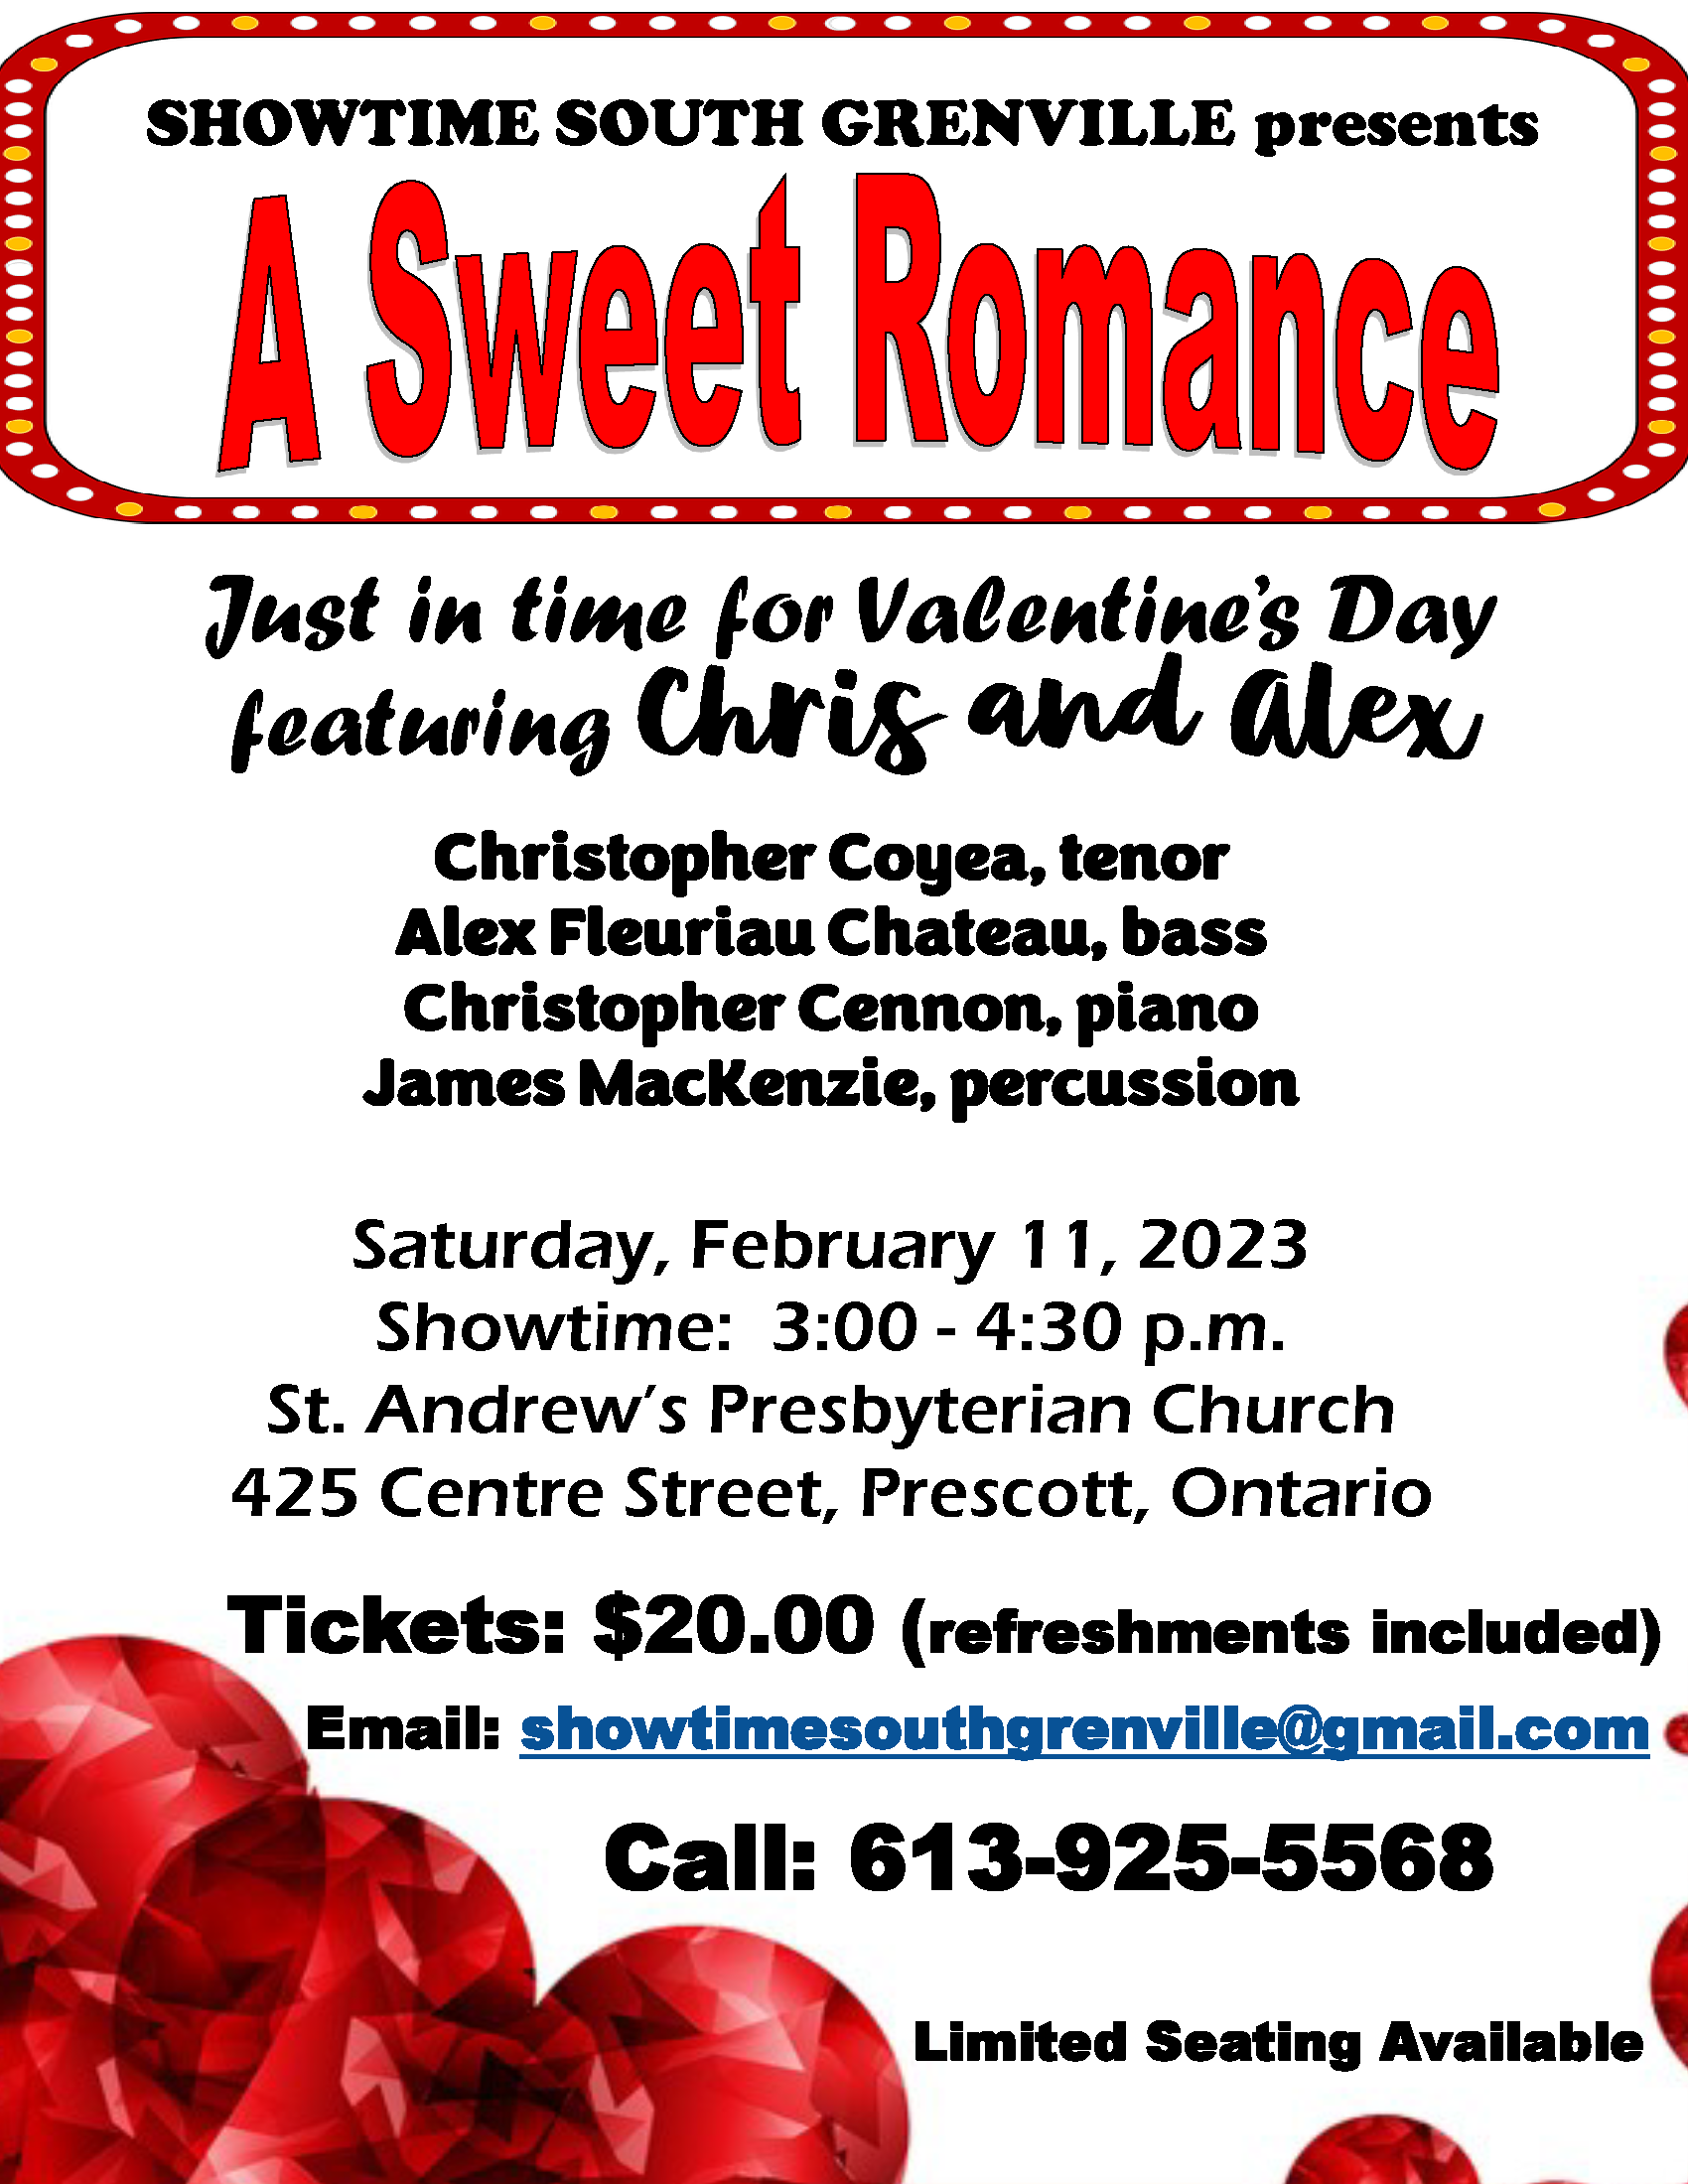 Showtime South Grenville Presents: A Sweet Romance